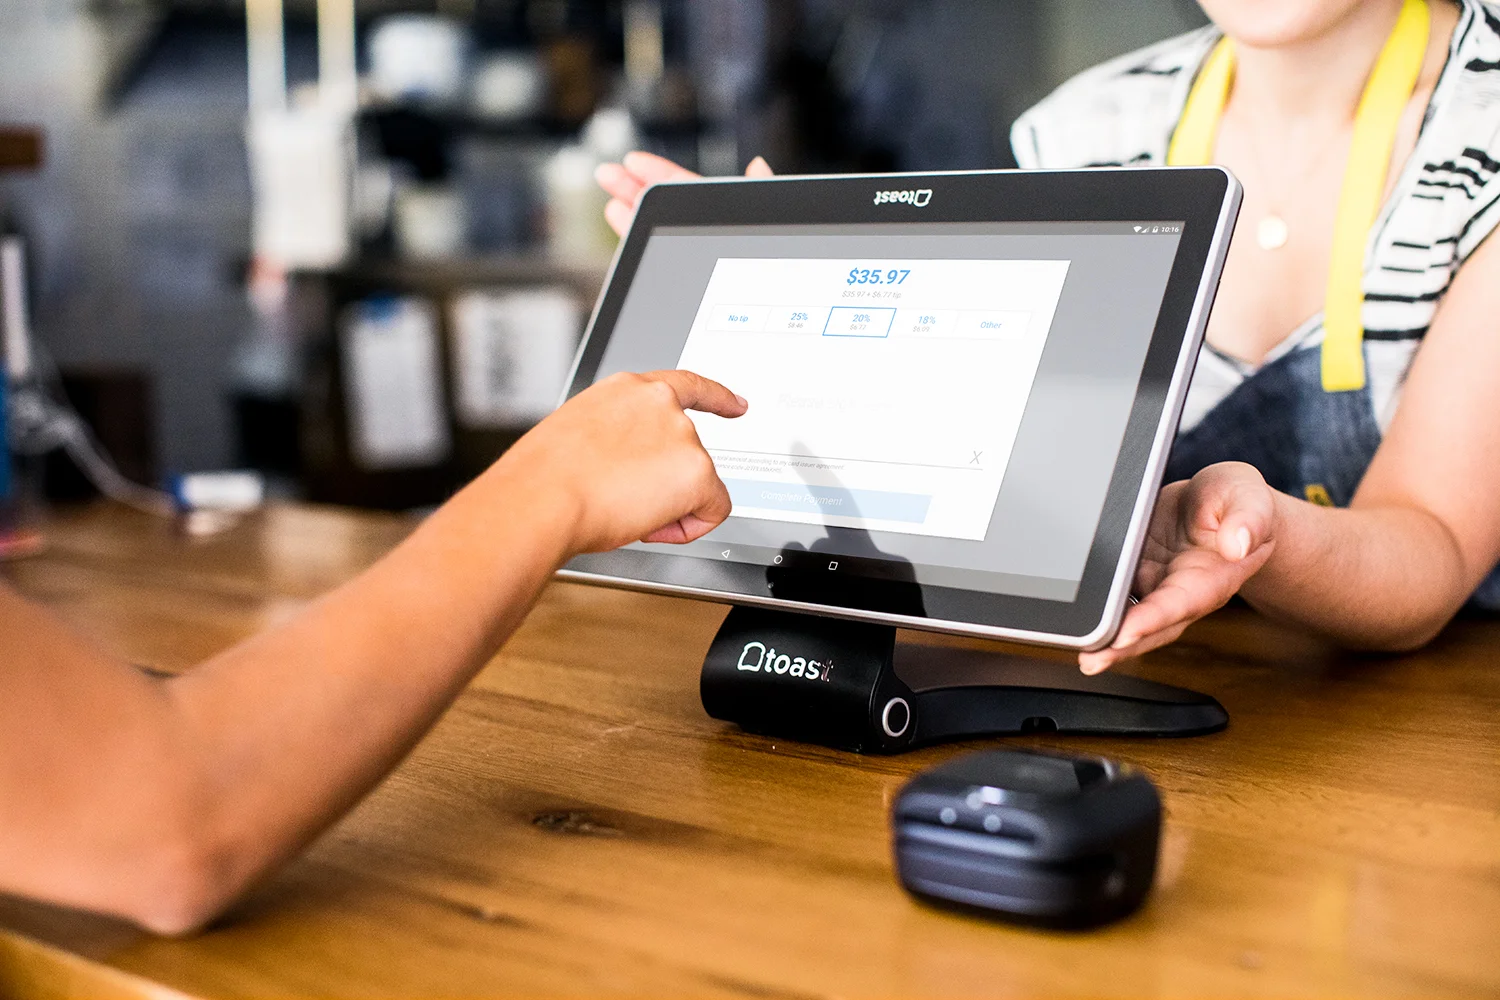 The future of restaurant technology